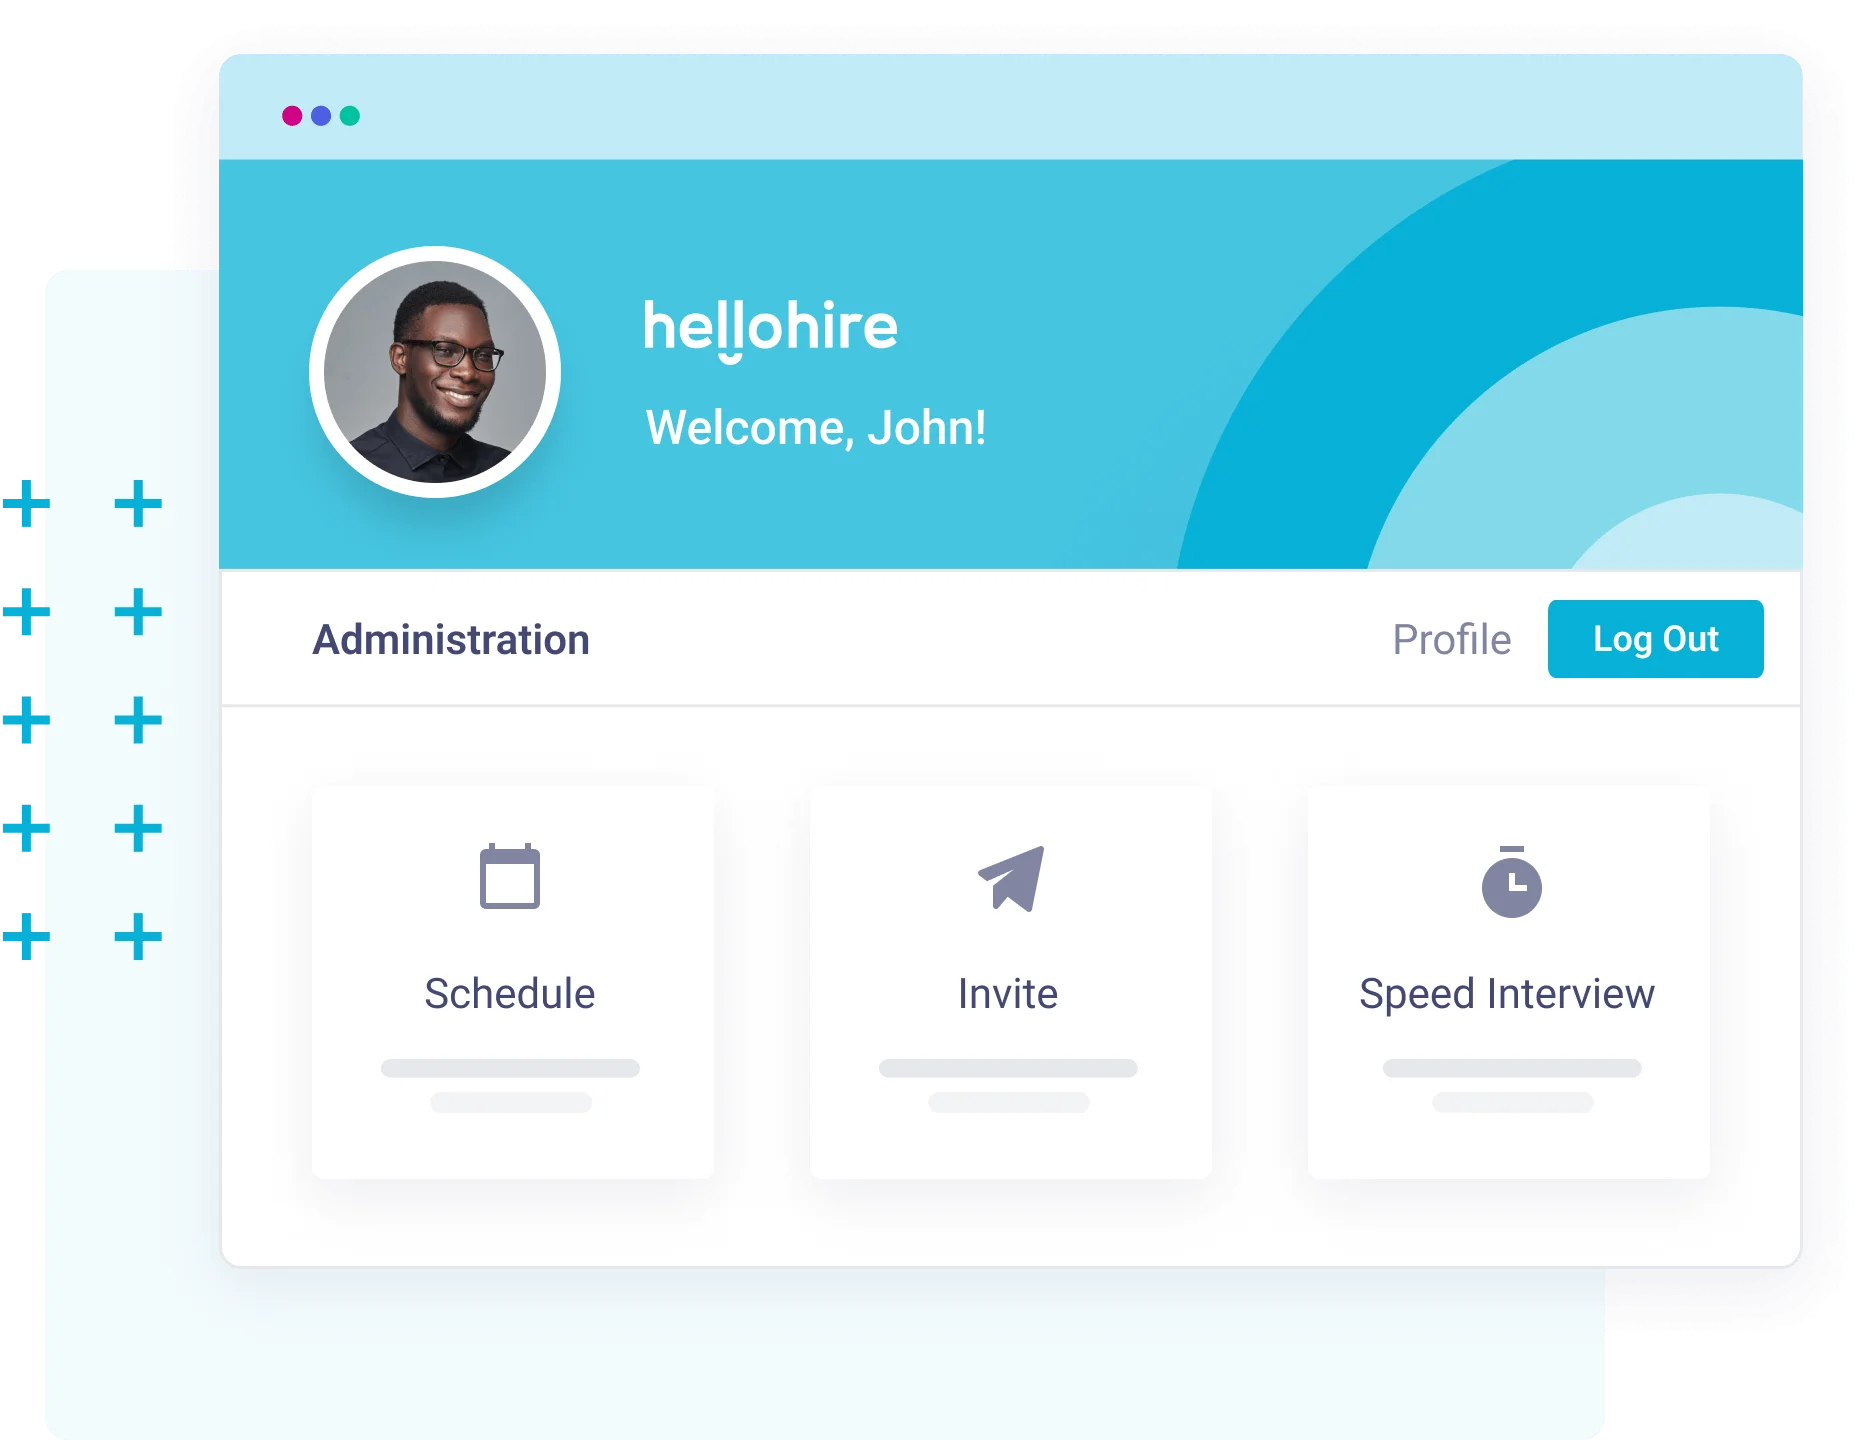 Hellohire recruiter admin settings for speed interview setup